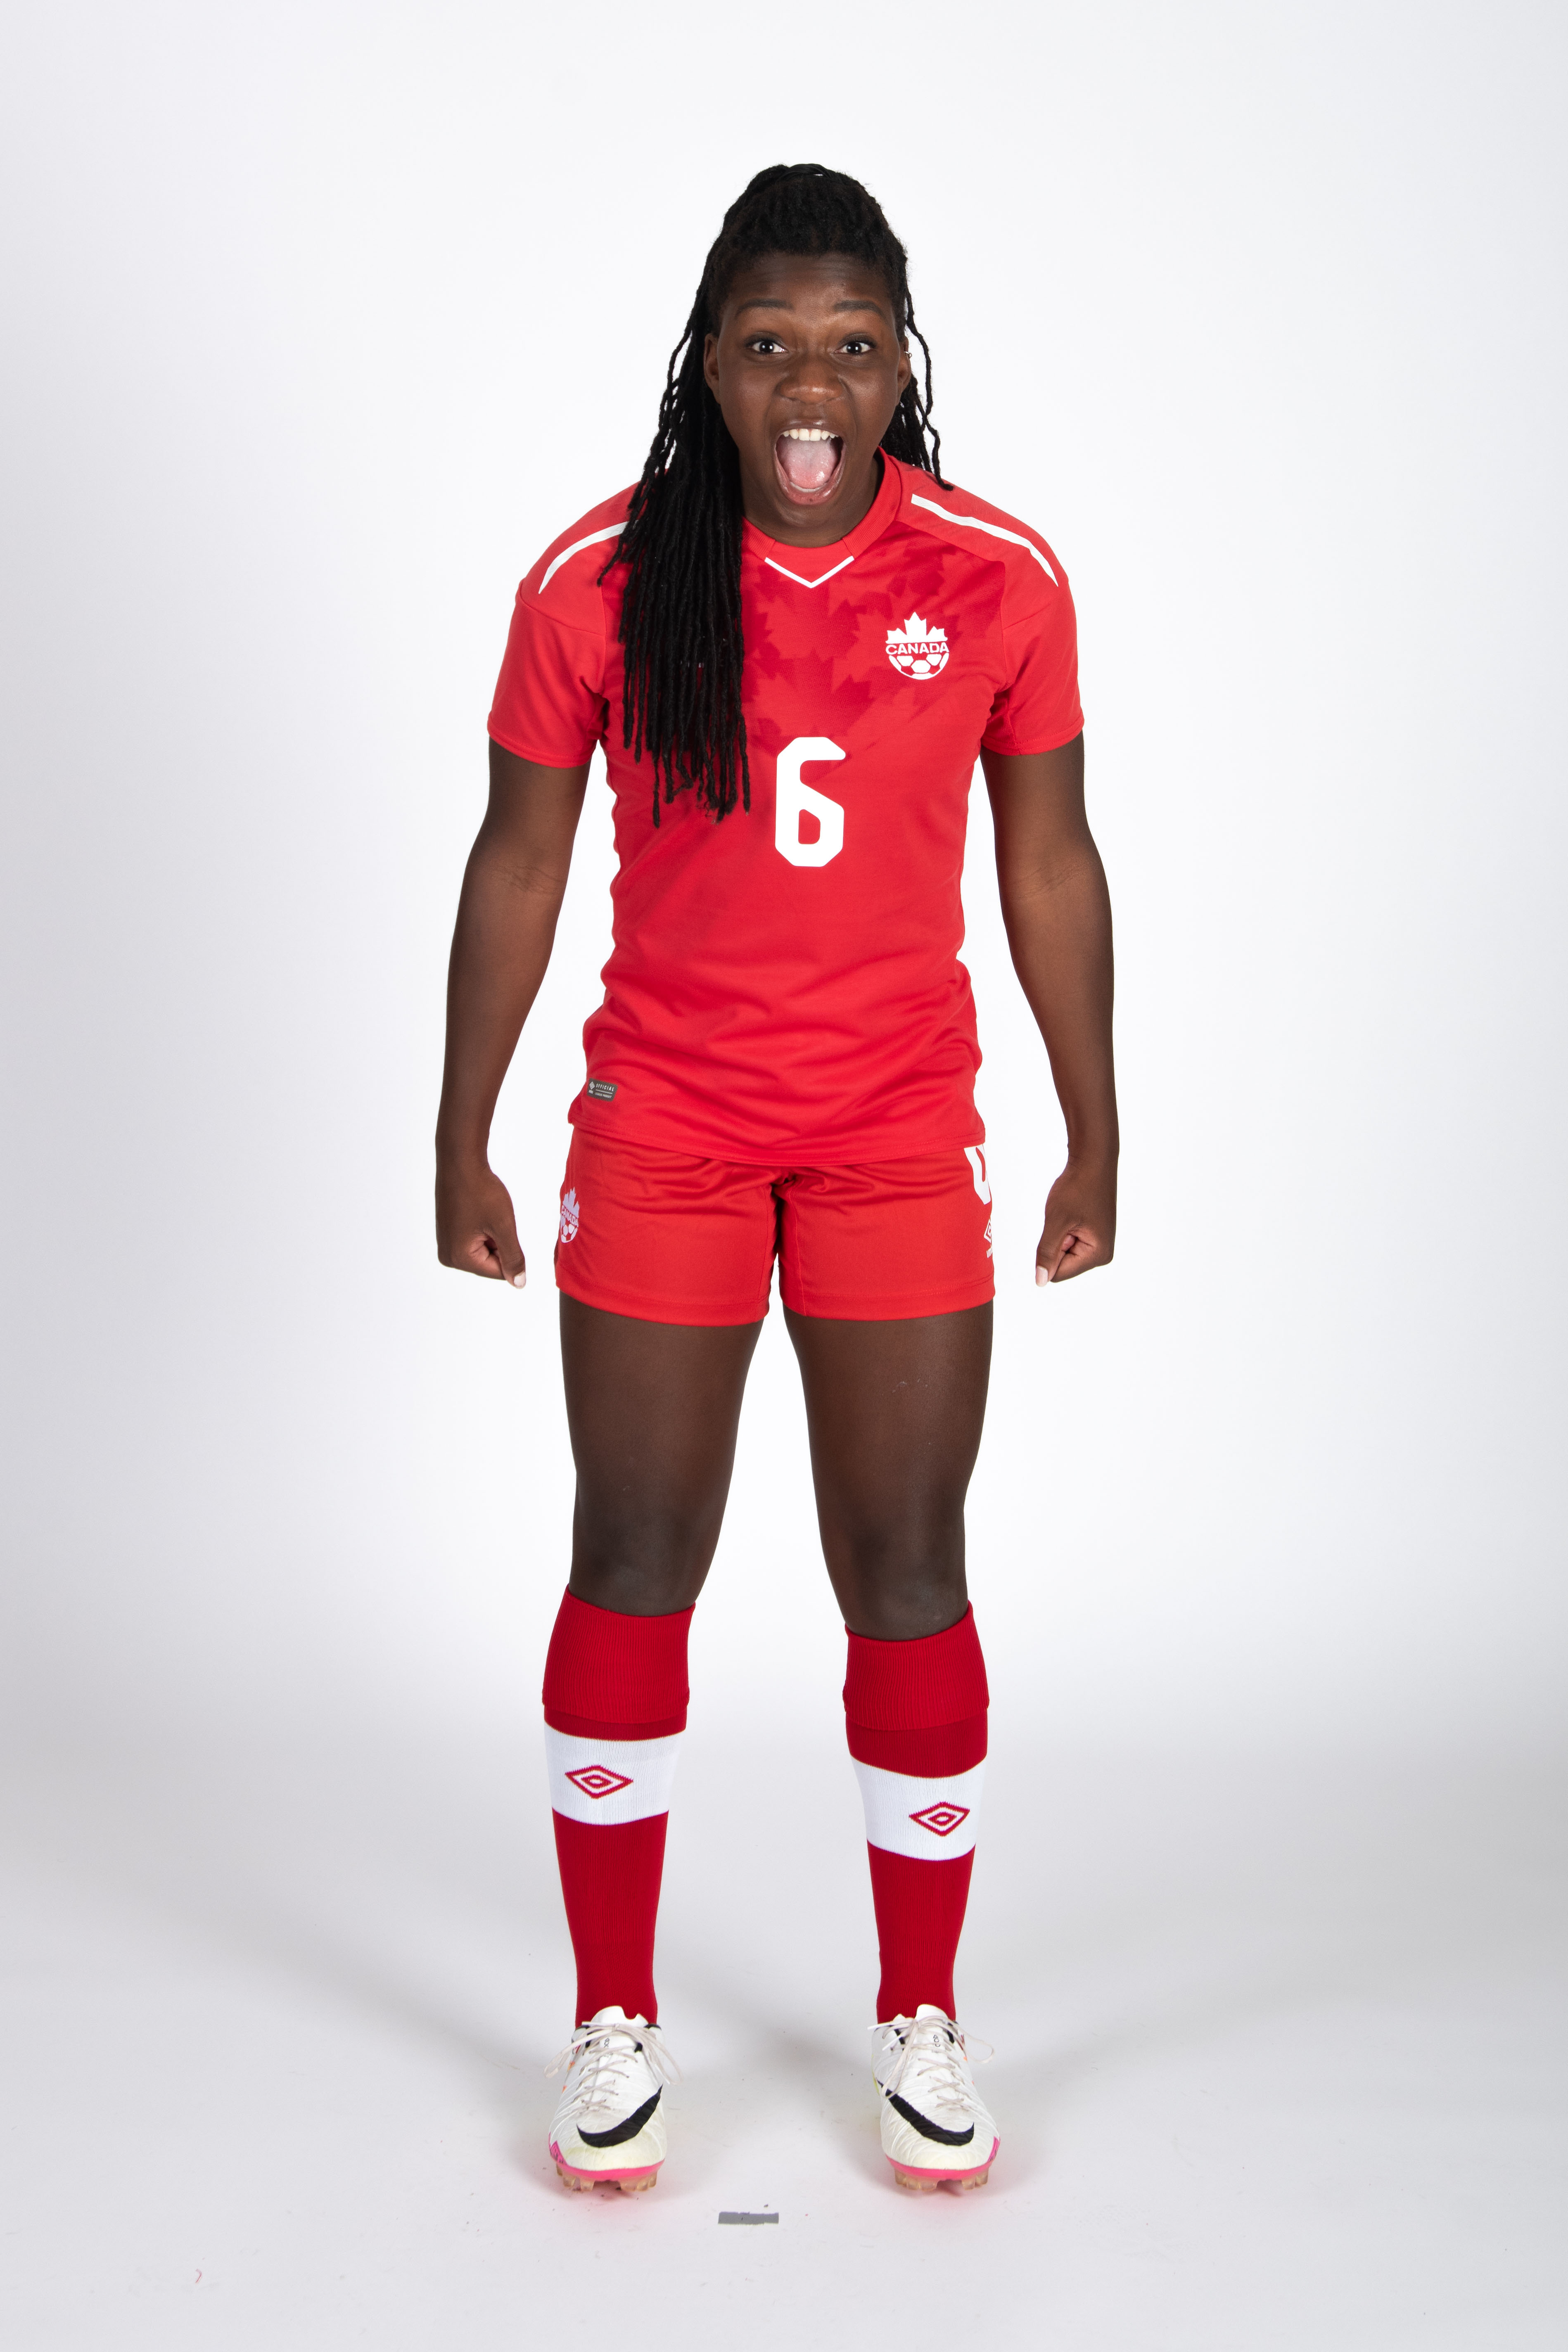 20180604_CANWNT_Rose_byBazyl13